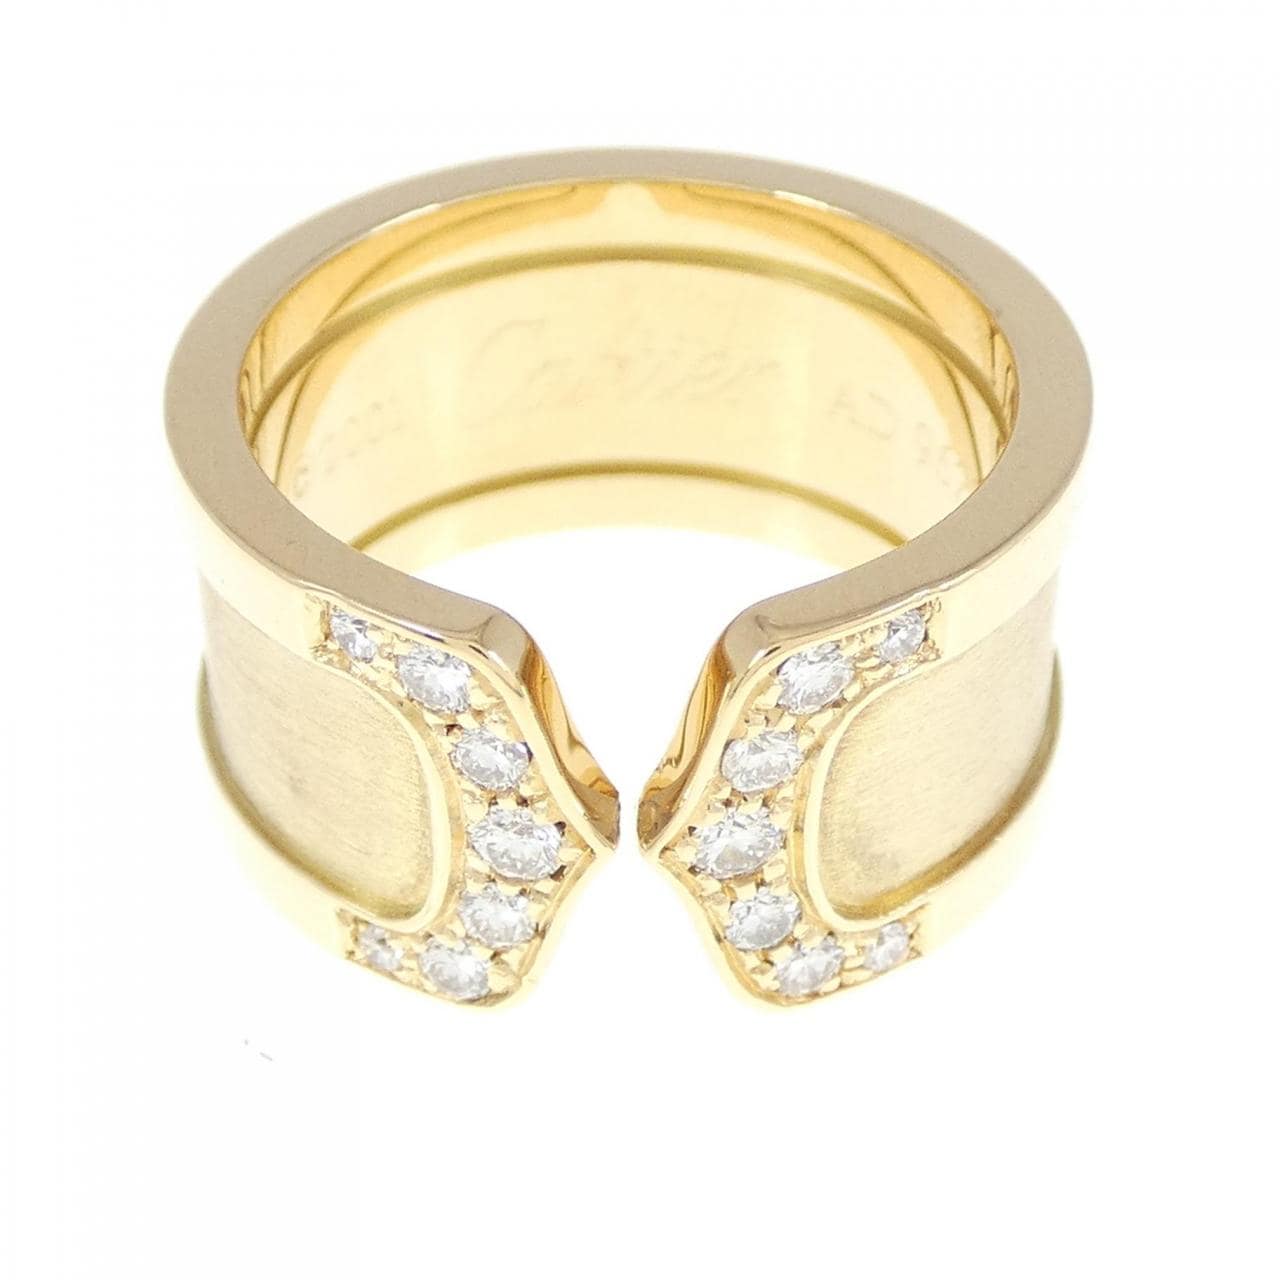 Cartier C2 Large Ring